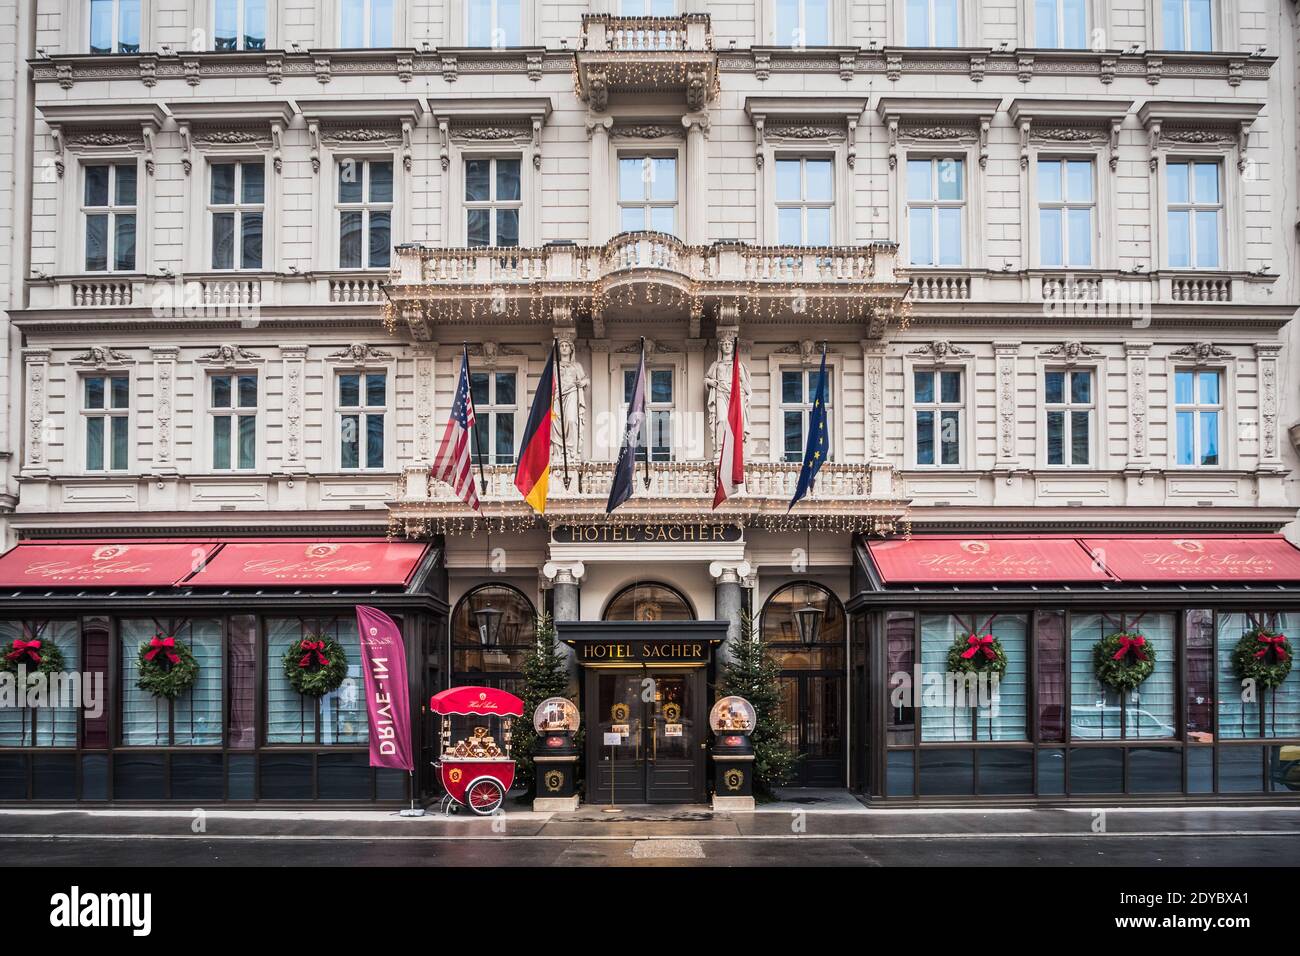 Vienna, Austria - Decembter 19 2020: Hotel Sacher Entrance, famous for its chocolate cake. Stock Photo